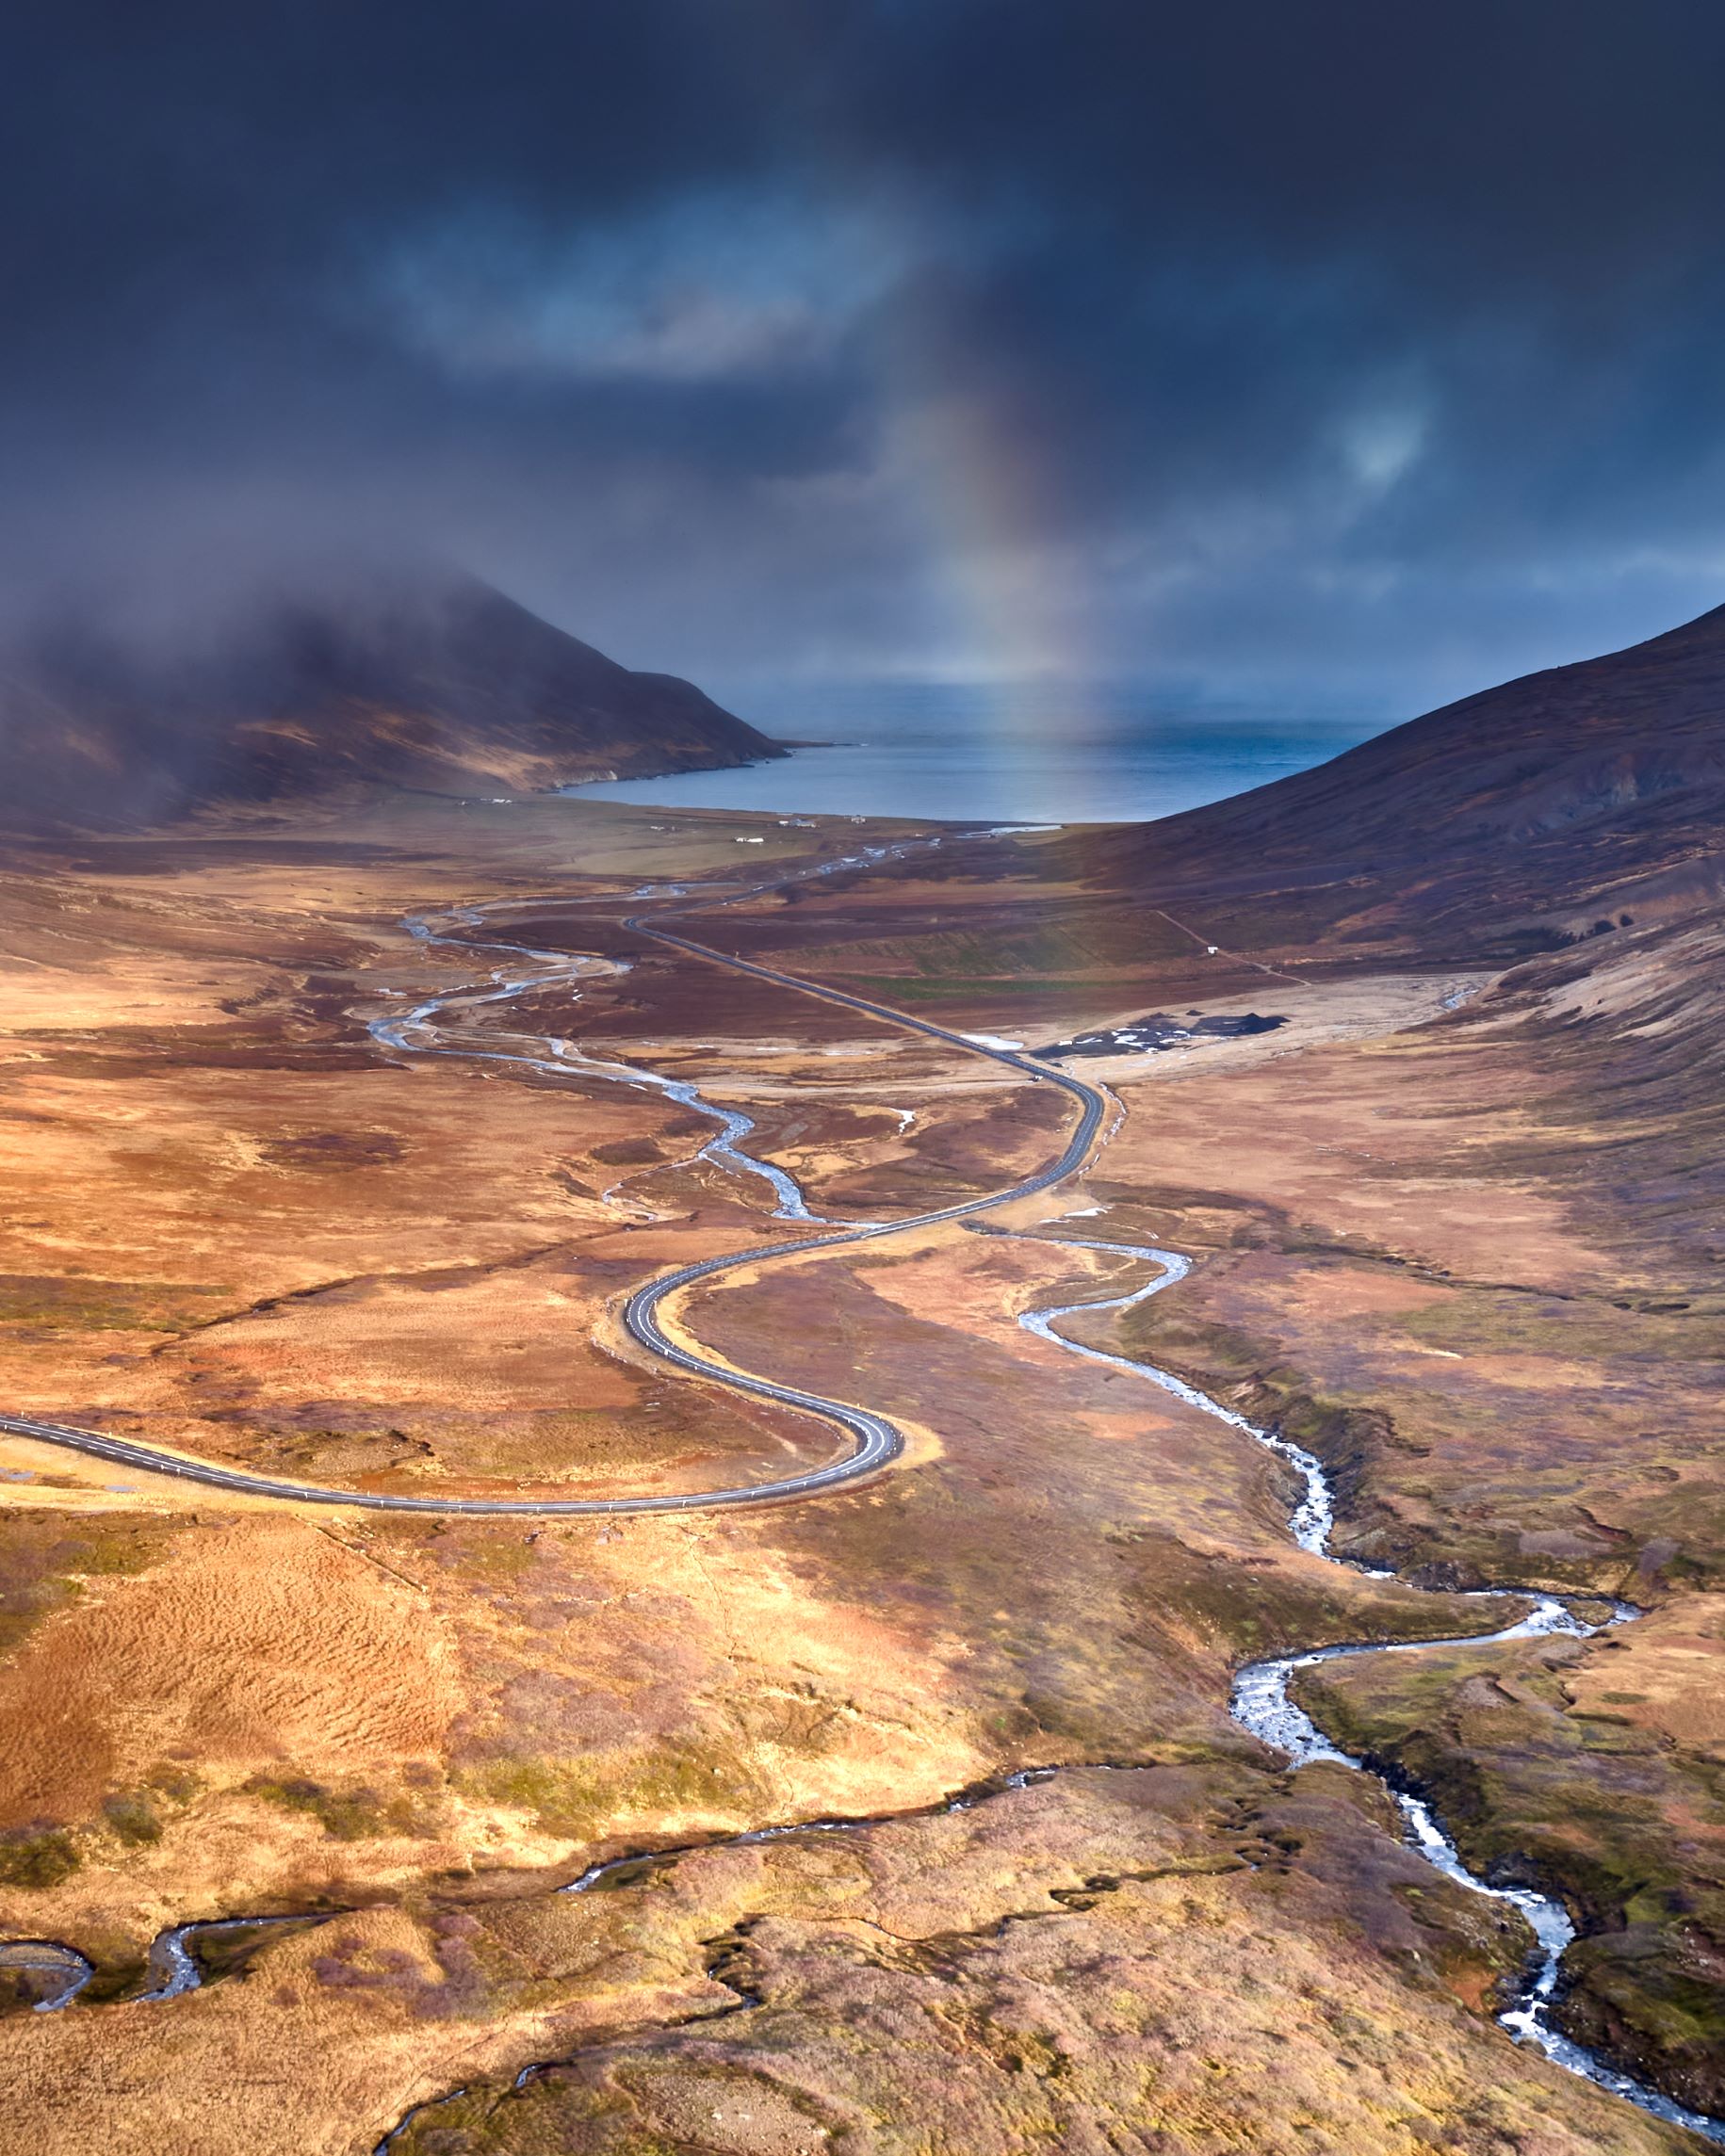 An elevated view of a road twisting down to a fjord edge, with a rainbow and cloudy skies overhead